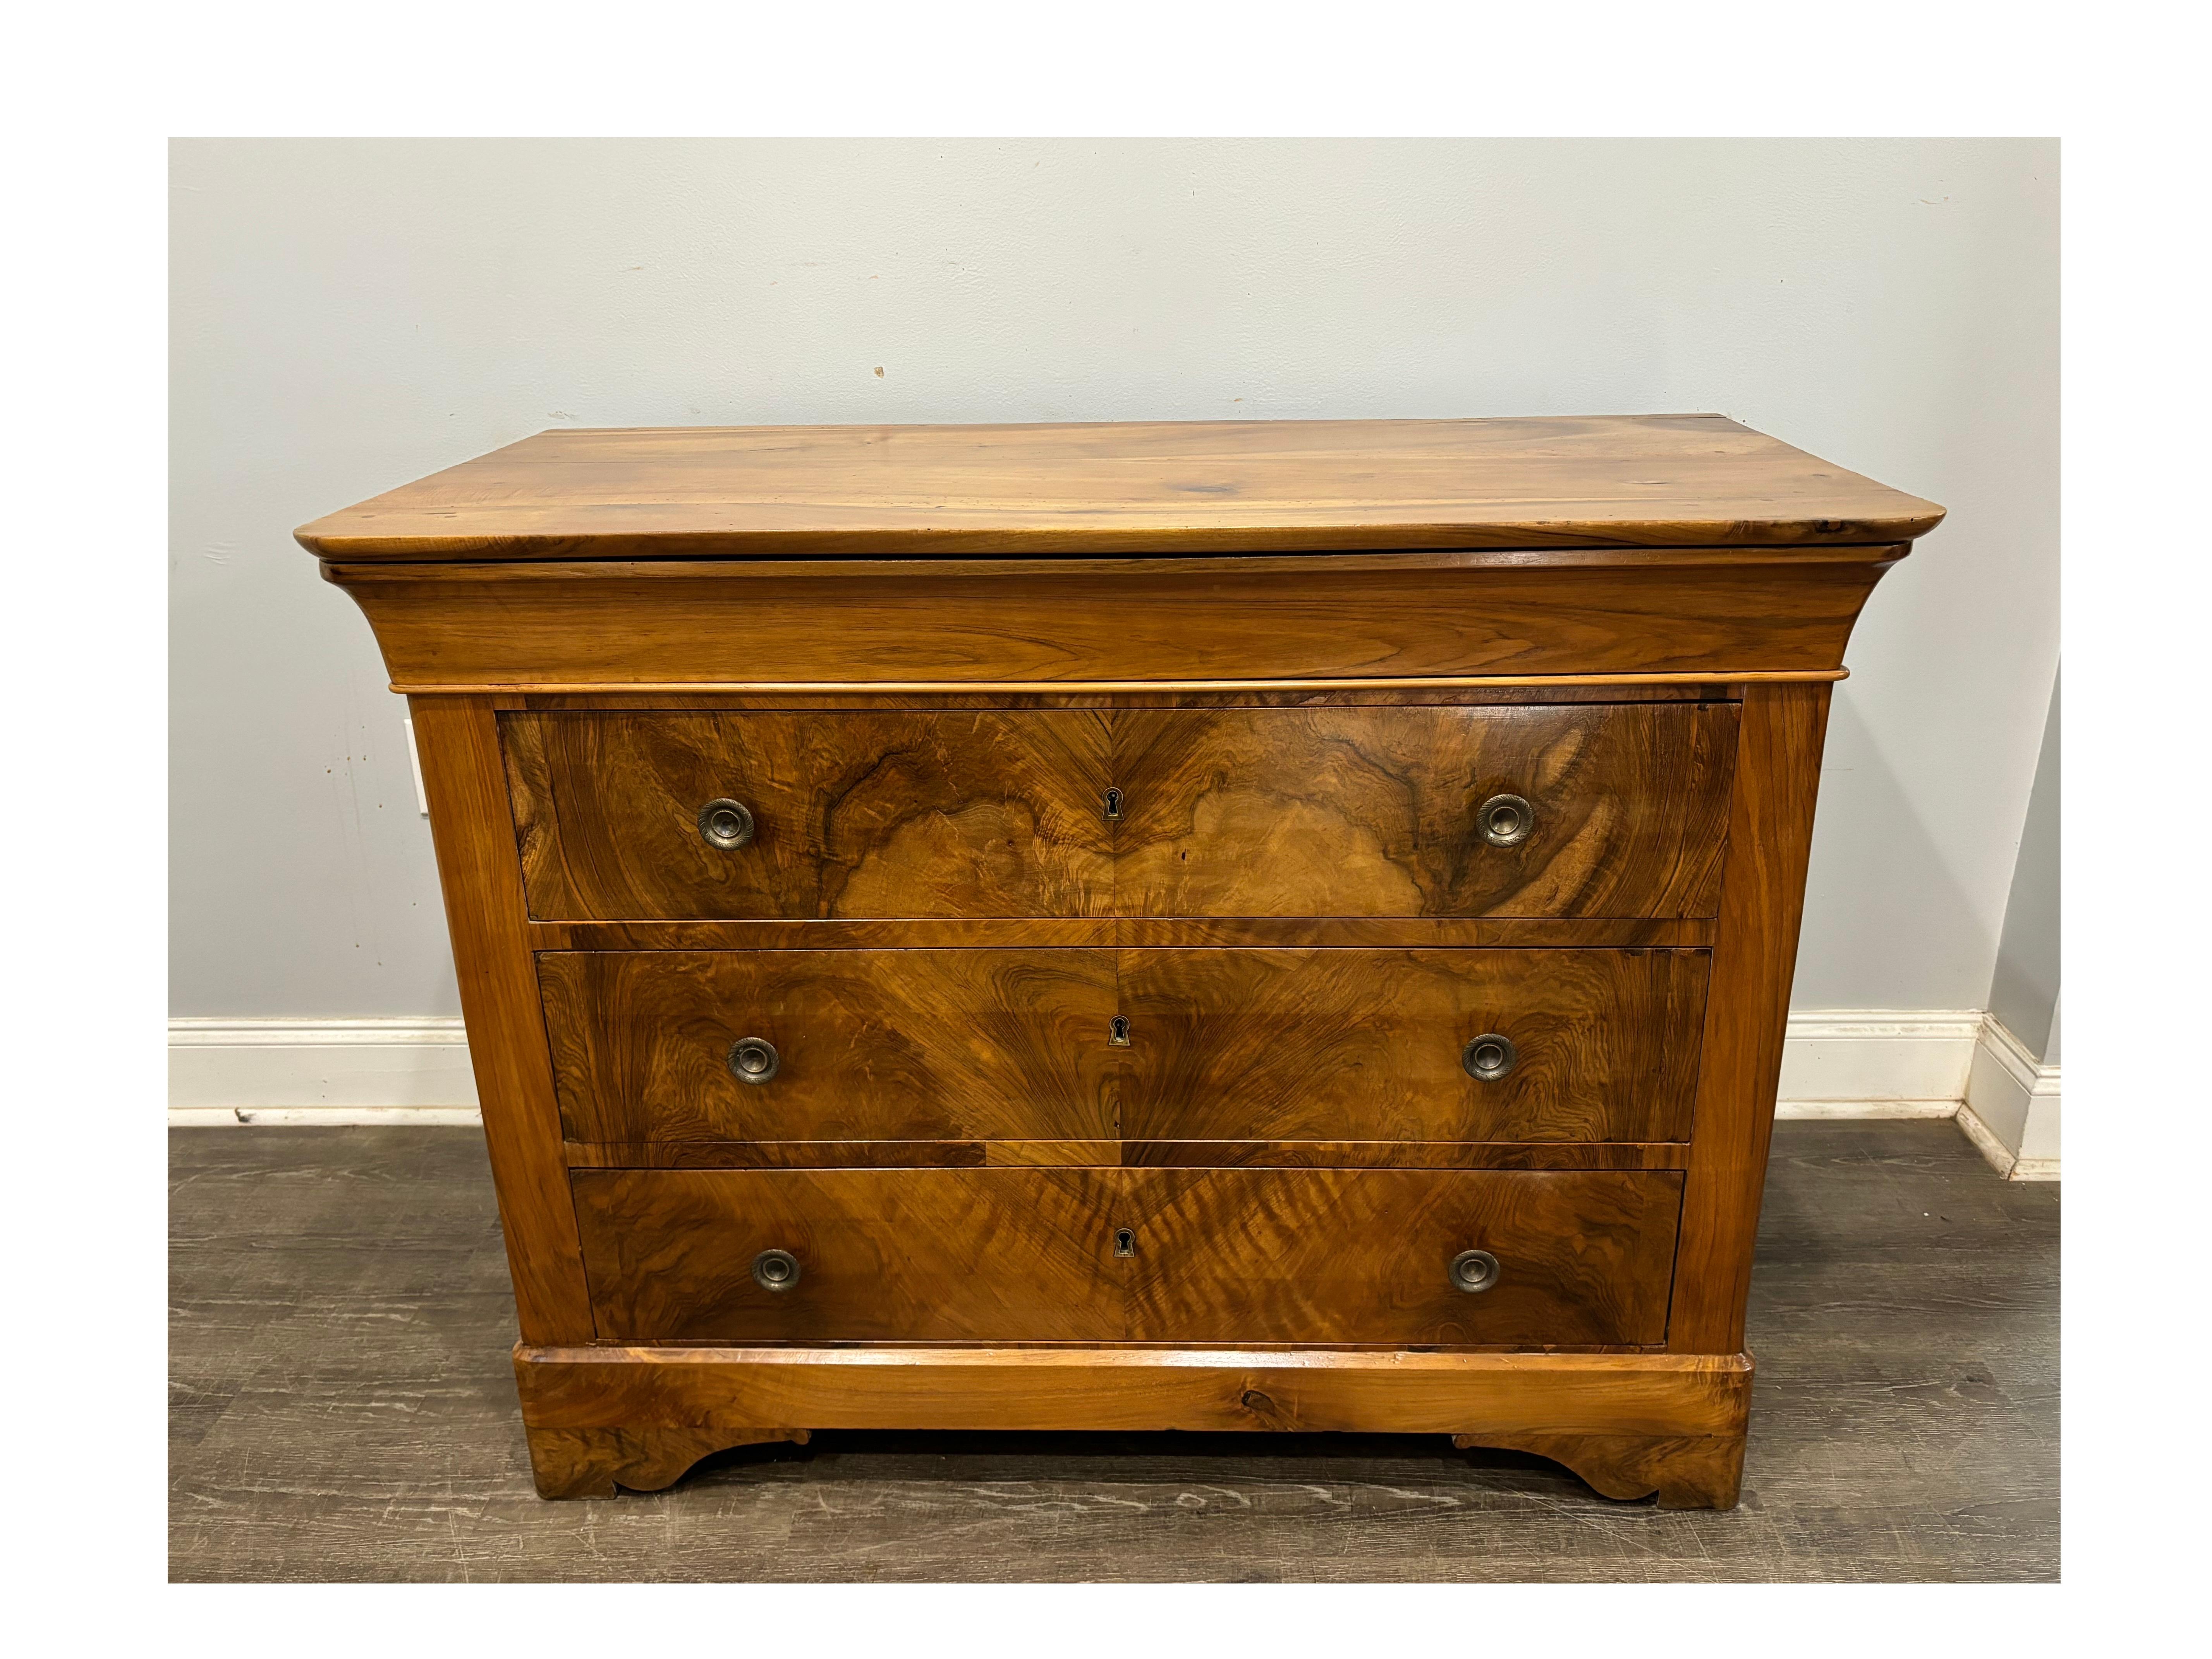 This Commode has a beautiful Blond flamed walnut that shows a heart. The top drawer is nicely curved.